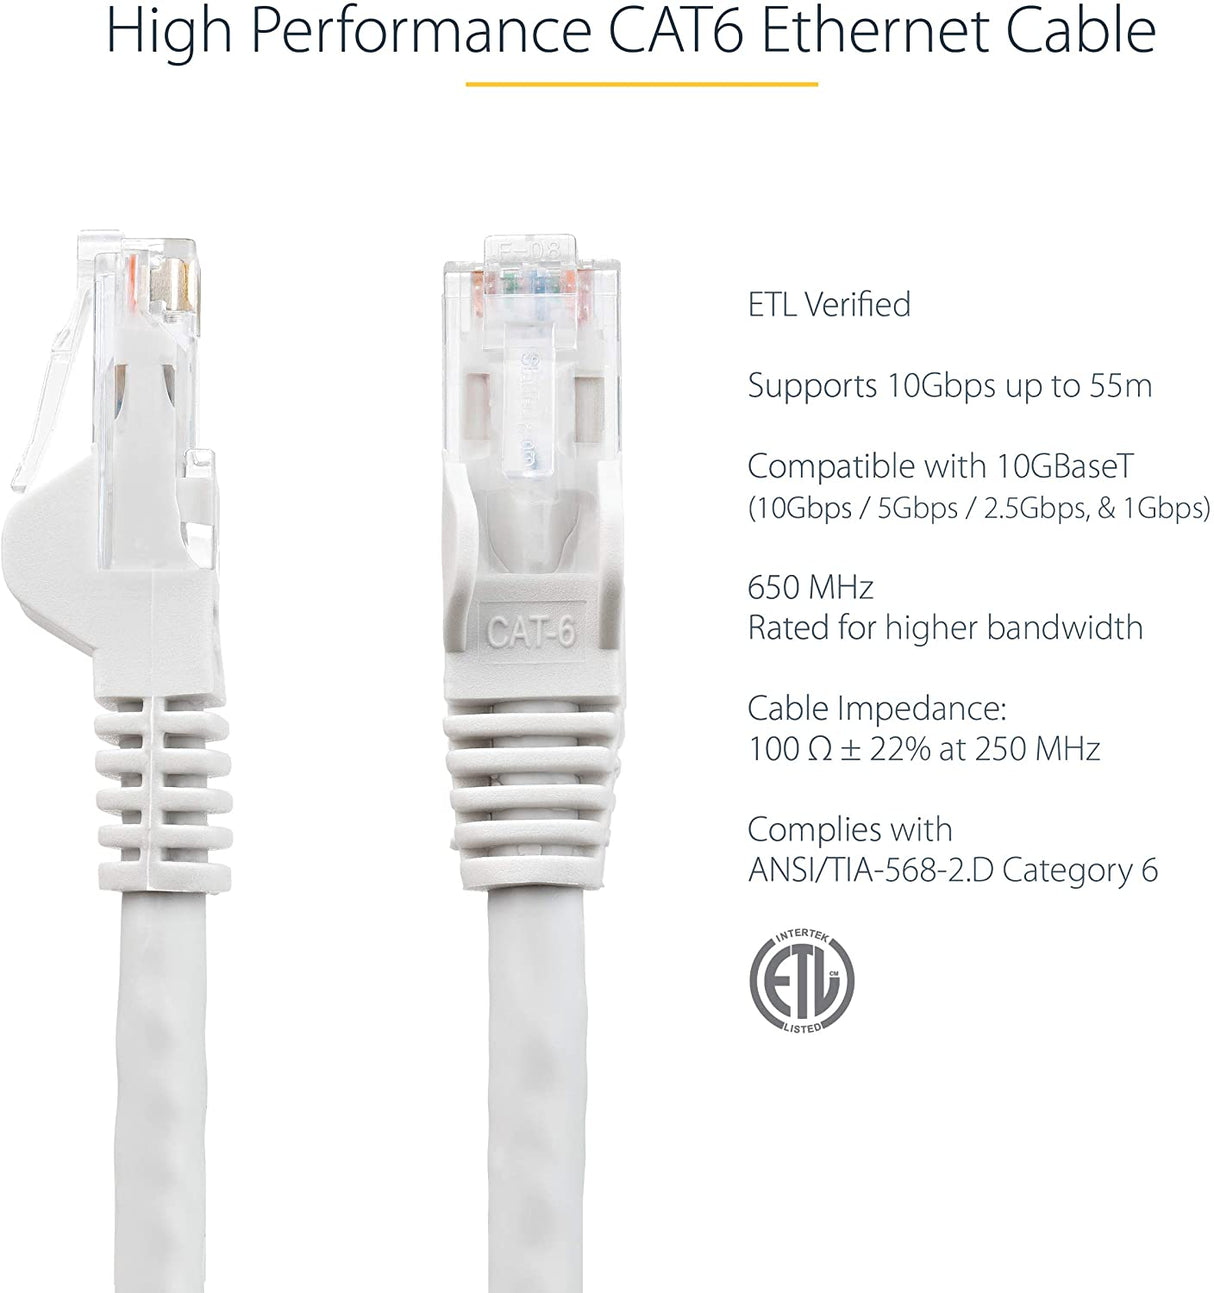 StarTech.com 35ft CAT6 Ethernet Cable - White CAT 6 Gigabit Ethernet Wire -650MHz 100W PoE RJ45 UTP Network/Patch Cord Snagless w/Strain Relief Fluke Tested/Wiring is UL Certified/TIA (N6PATCH35WH) White 35 ft / 10.6 m 1 Pack